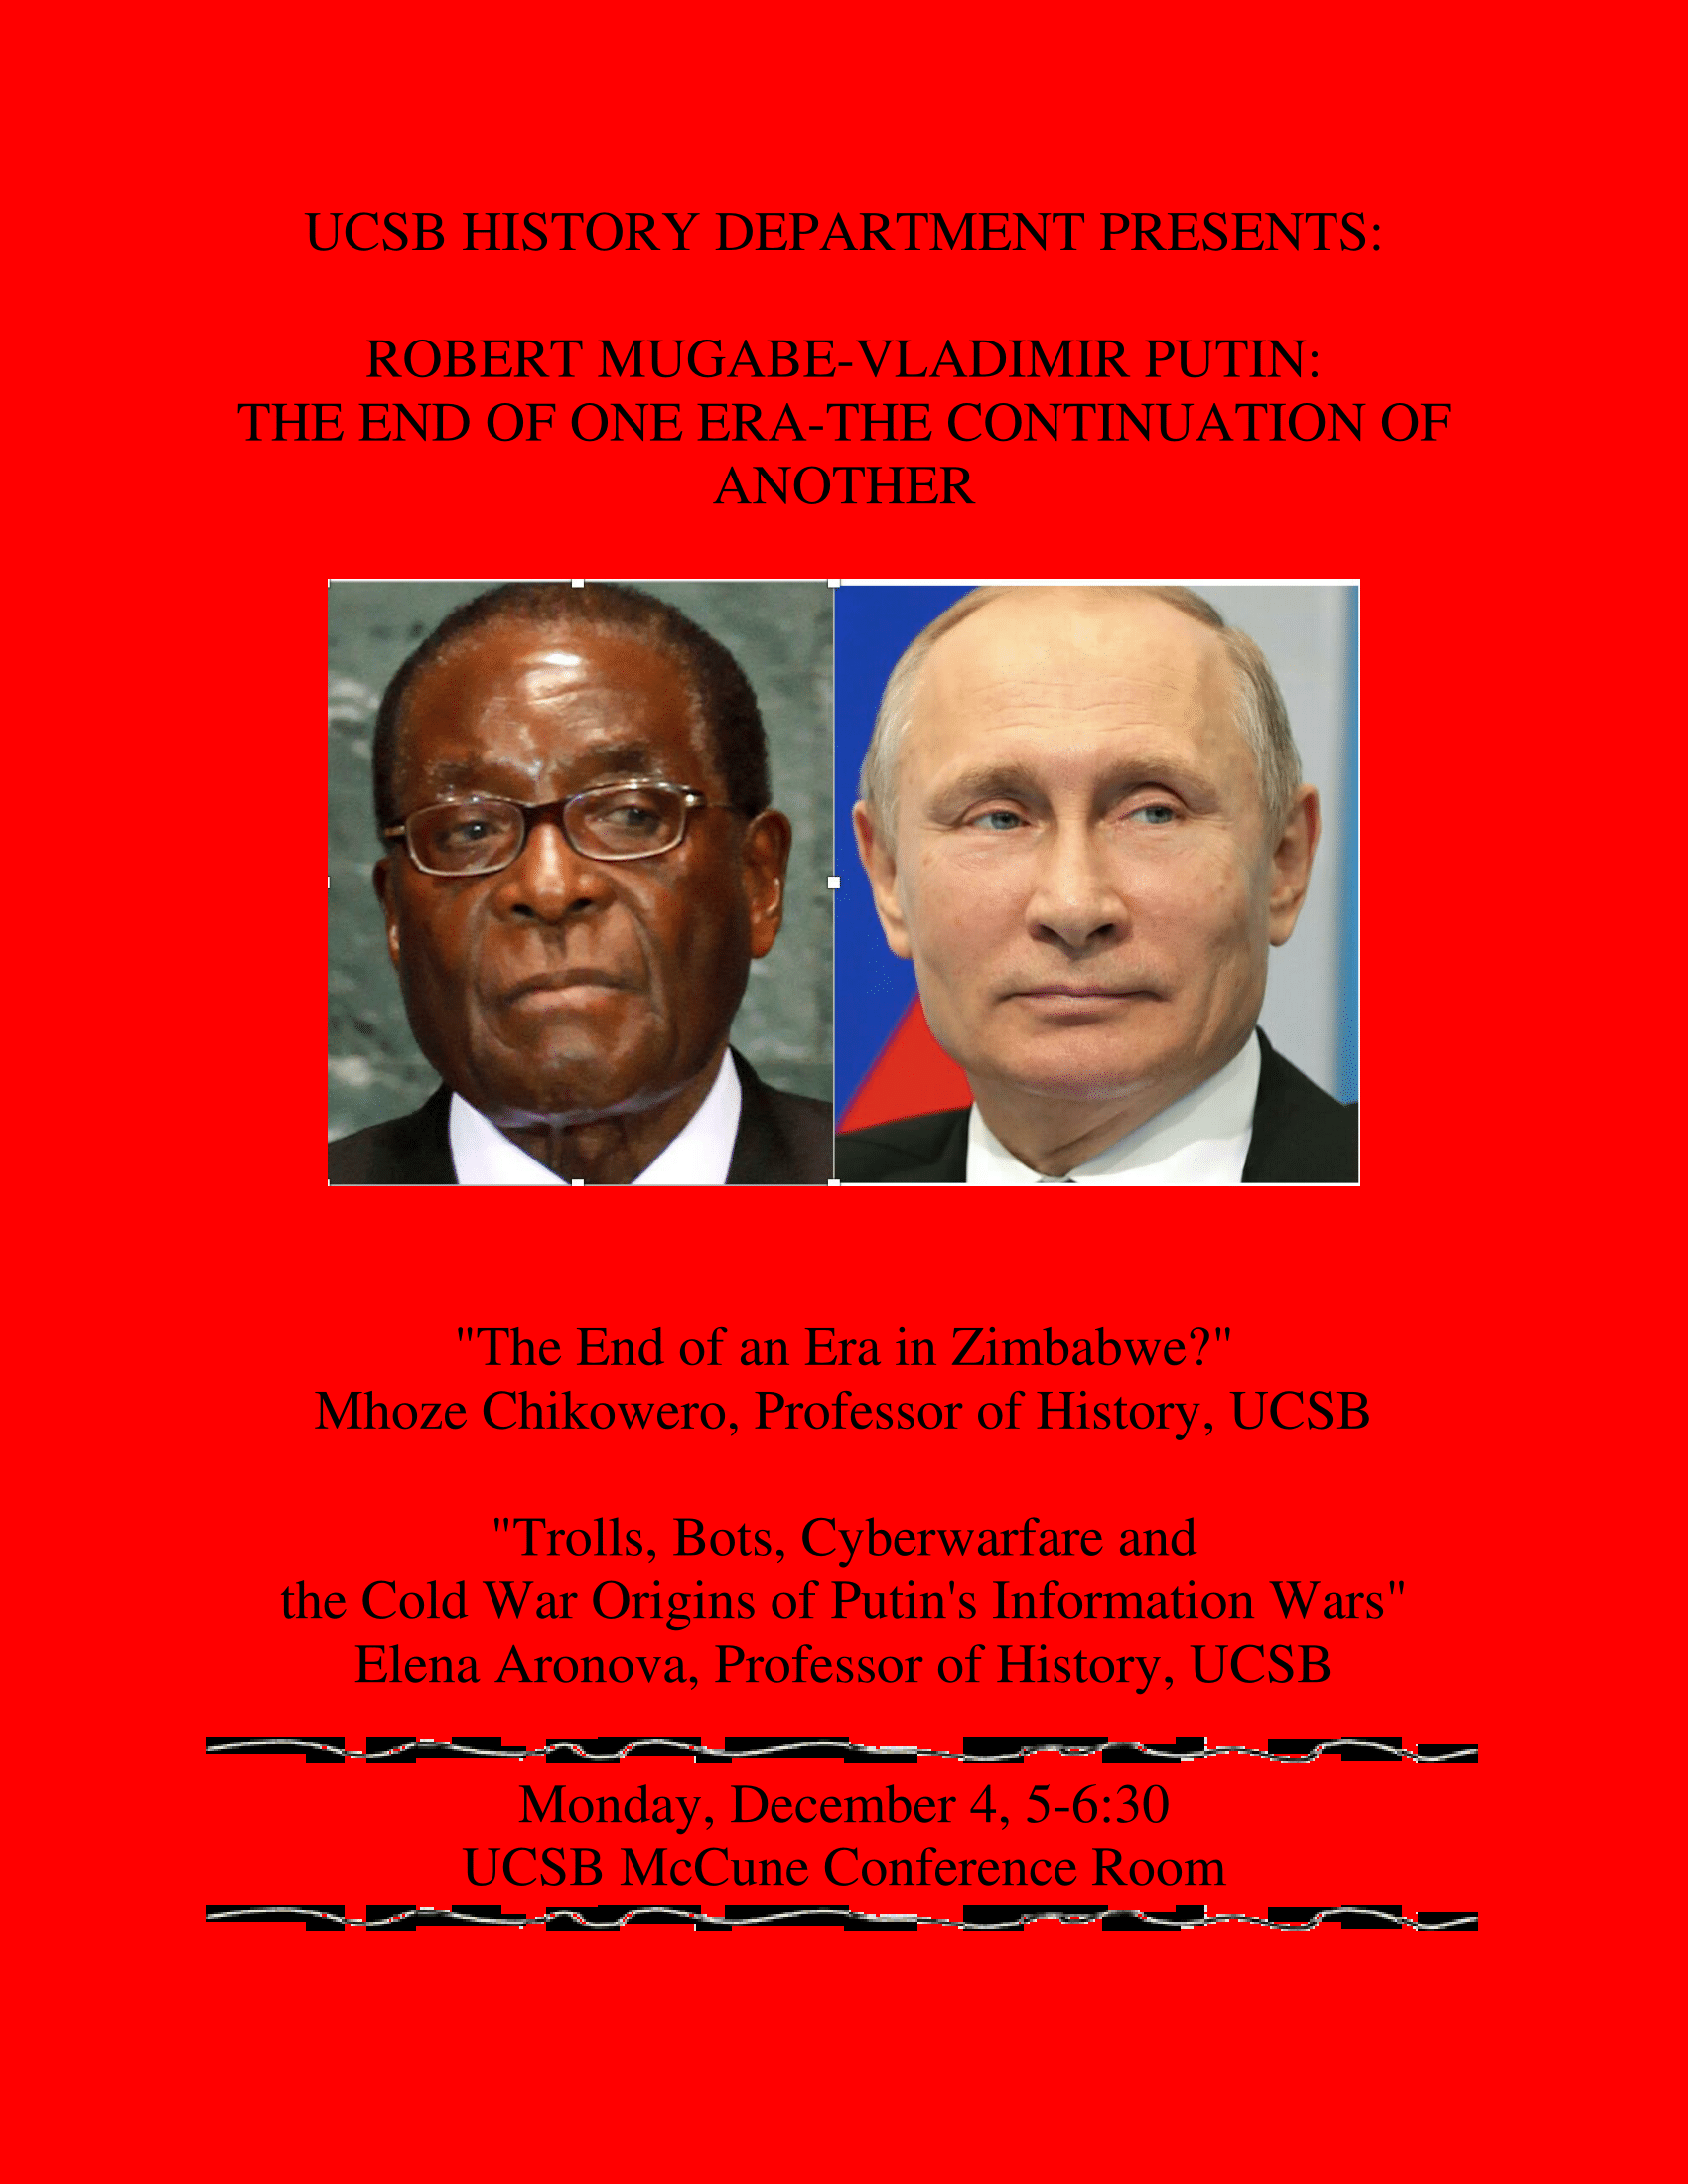 flyer of Robert Mugabe-Vladimir Putin: The End of One Era-Continuation of Another